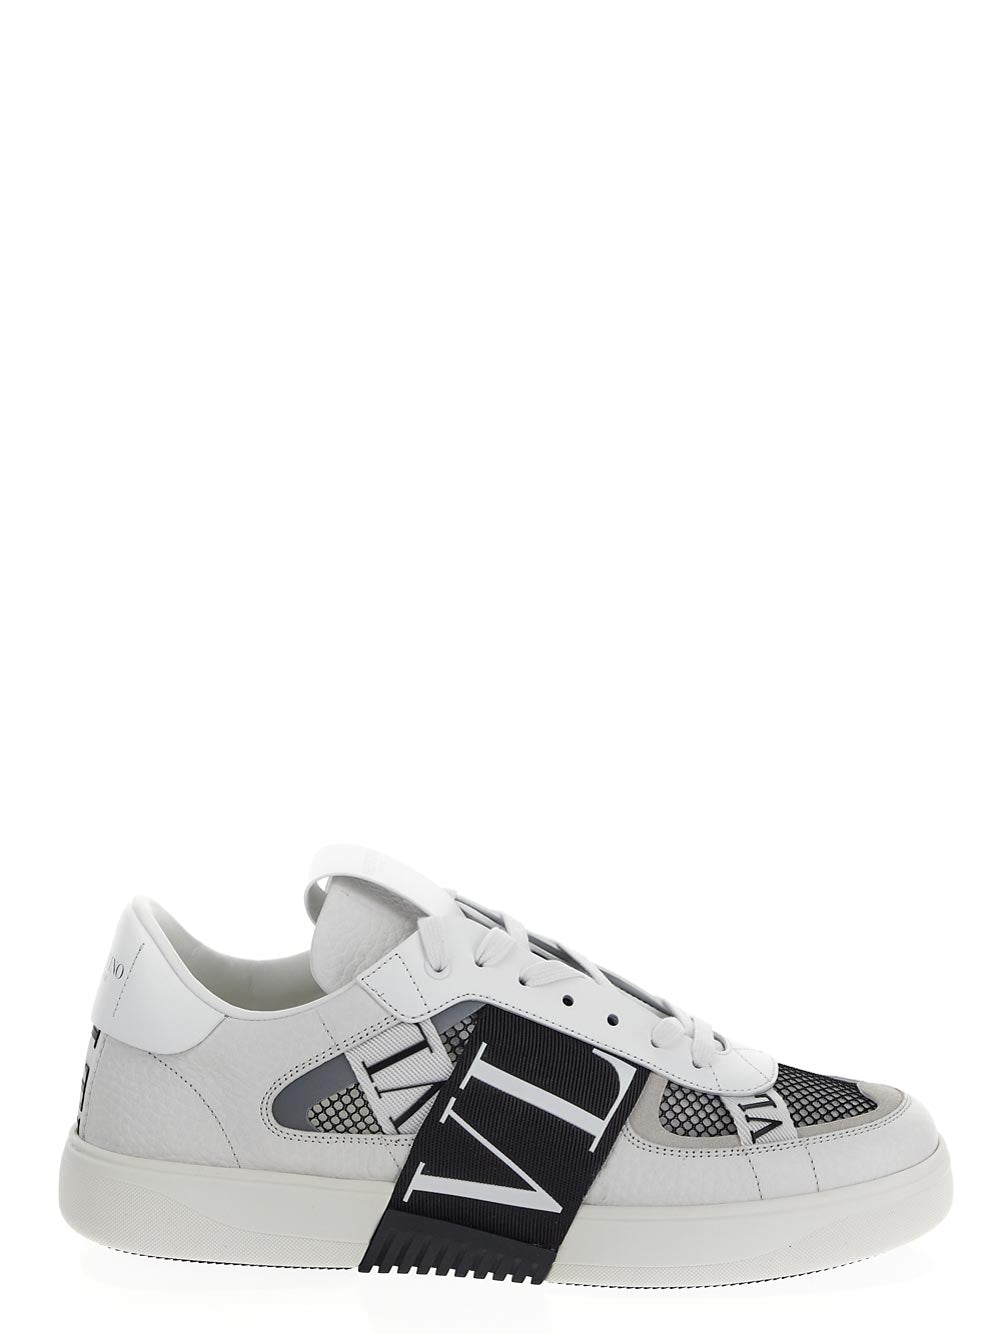 Valentino Garavani Vl7N Low-Top Sneakers In Calfskin And Mesh Fabric With Bands